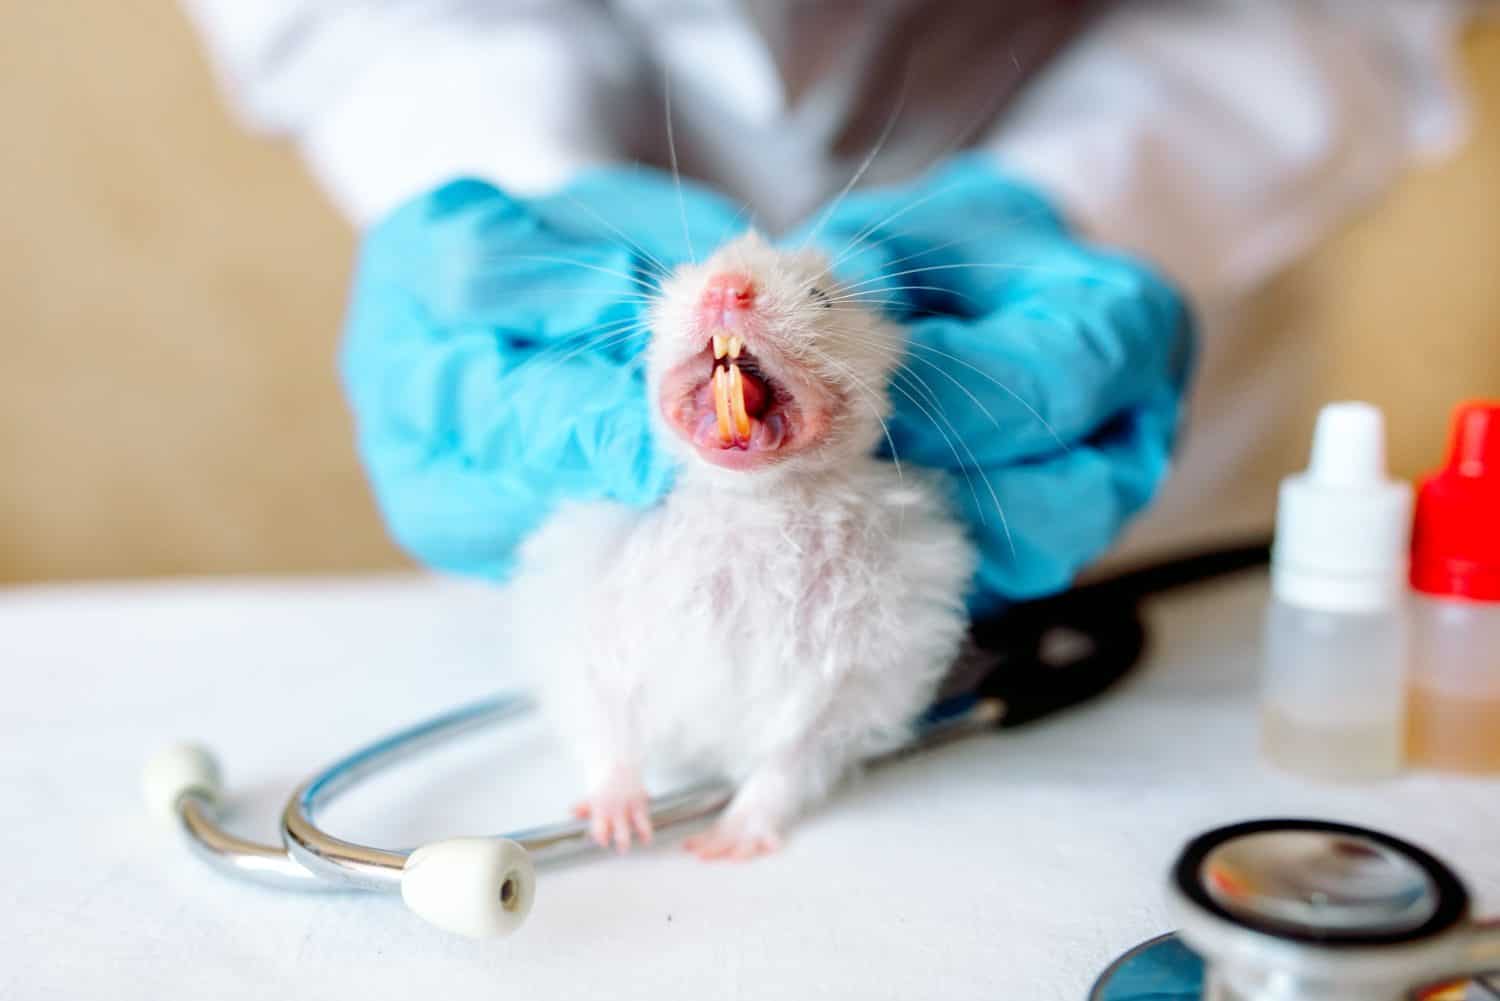 Hands of a doctor. Vet doctor examines the animal in the clinic with stethoscope. Animal on examination in vet clinic. Inspection of the teeth of a hamster by a doctor, a large mouth in an animal.